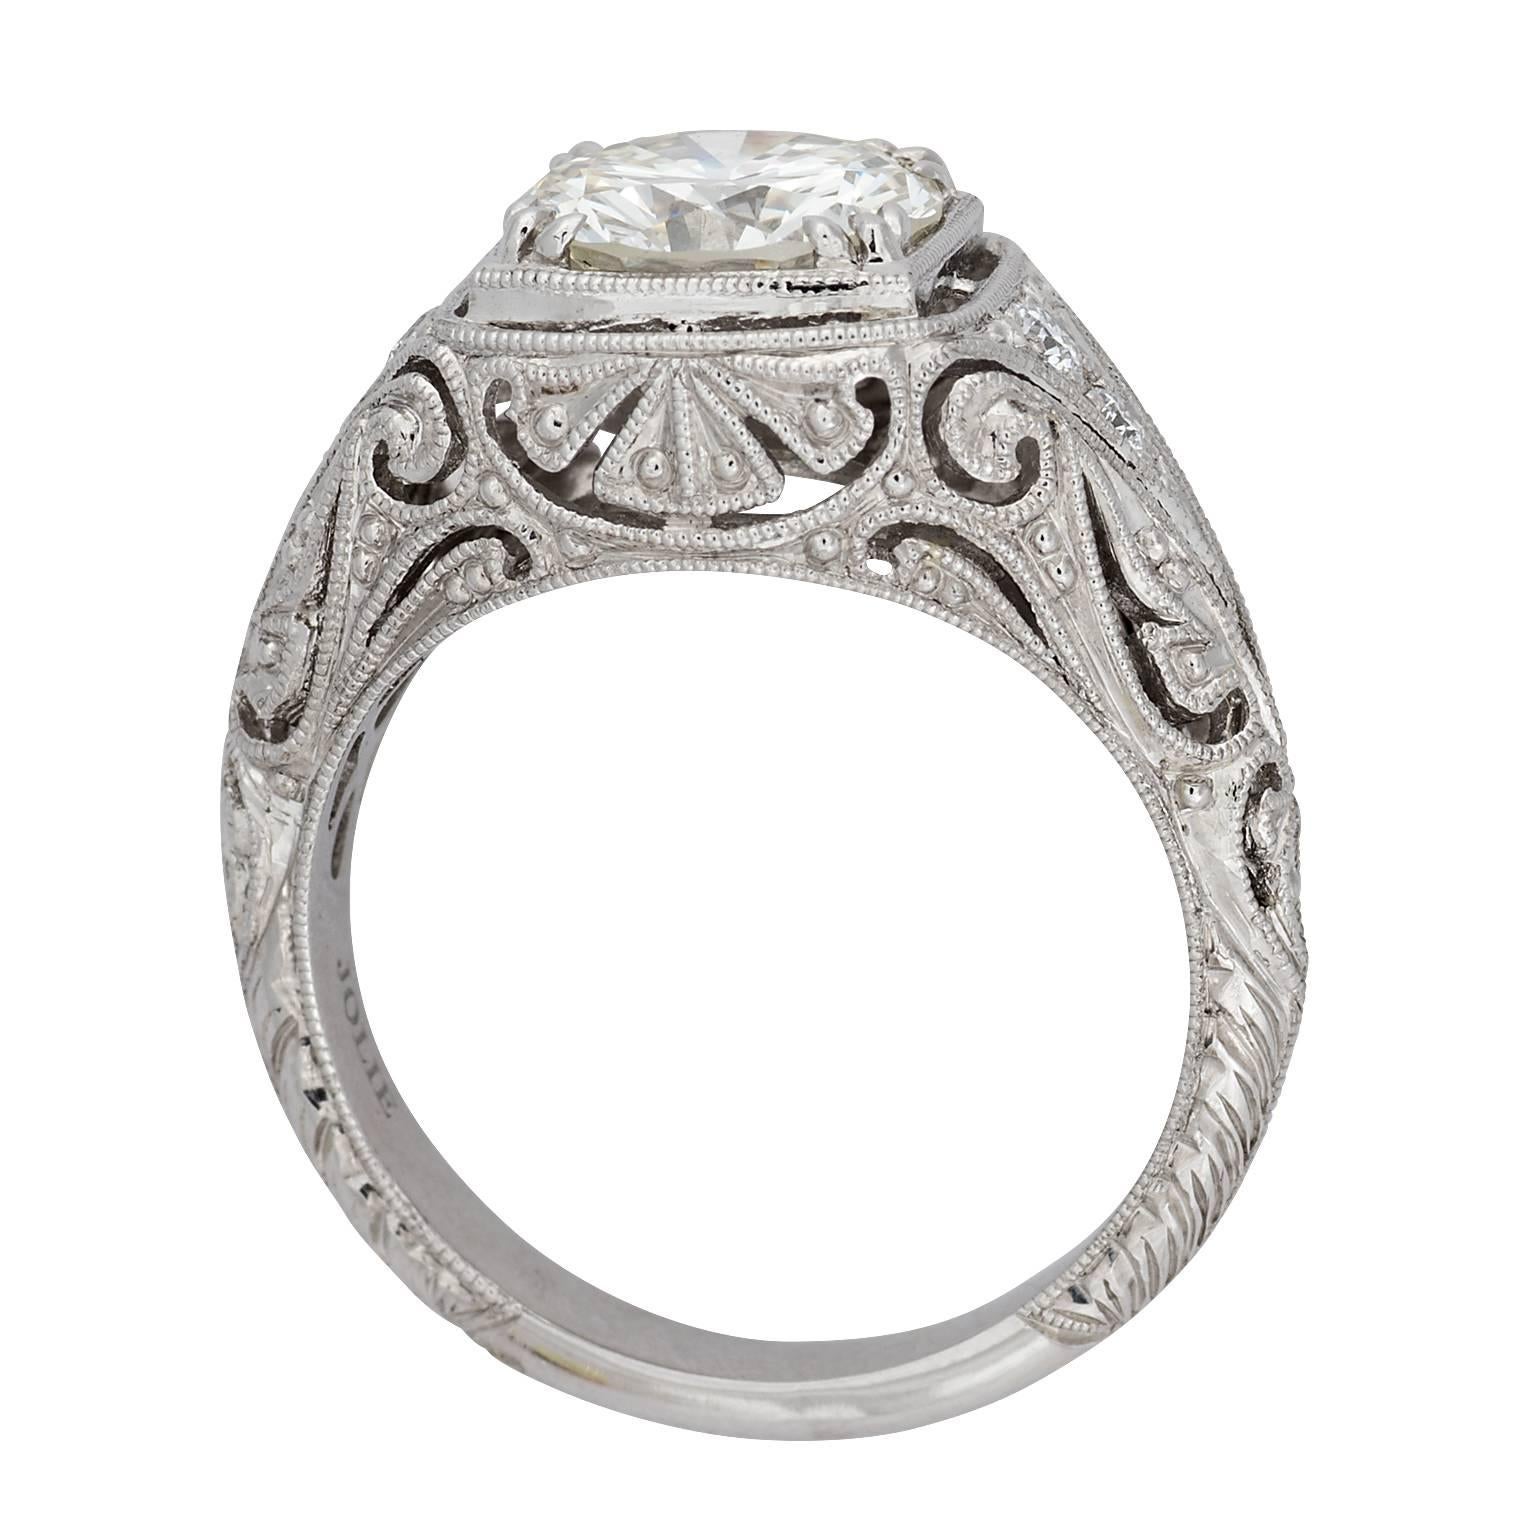 Art Deco style 1.99 carat round transitional cut diamond platinum engagement ring.  The diamond is graded by GIA as L color, VS2 clarity, set in a diamond filigree mounting.  There are four diamonds in the mounting, with a weight of 0.09 carats